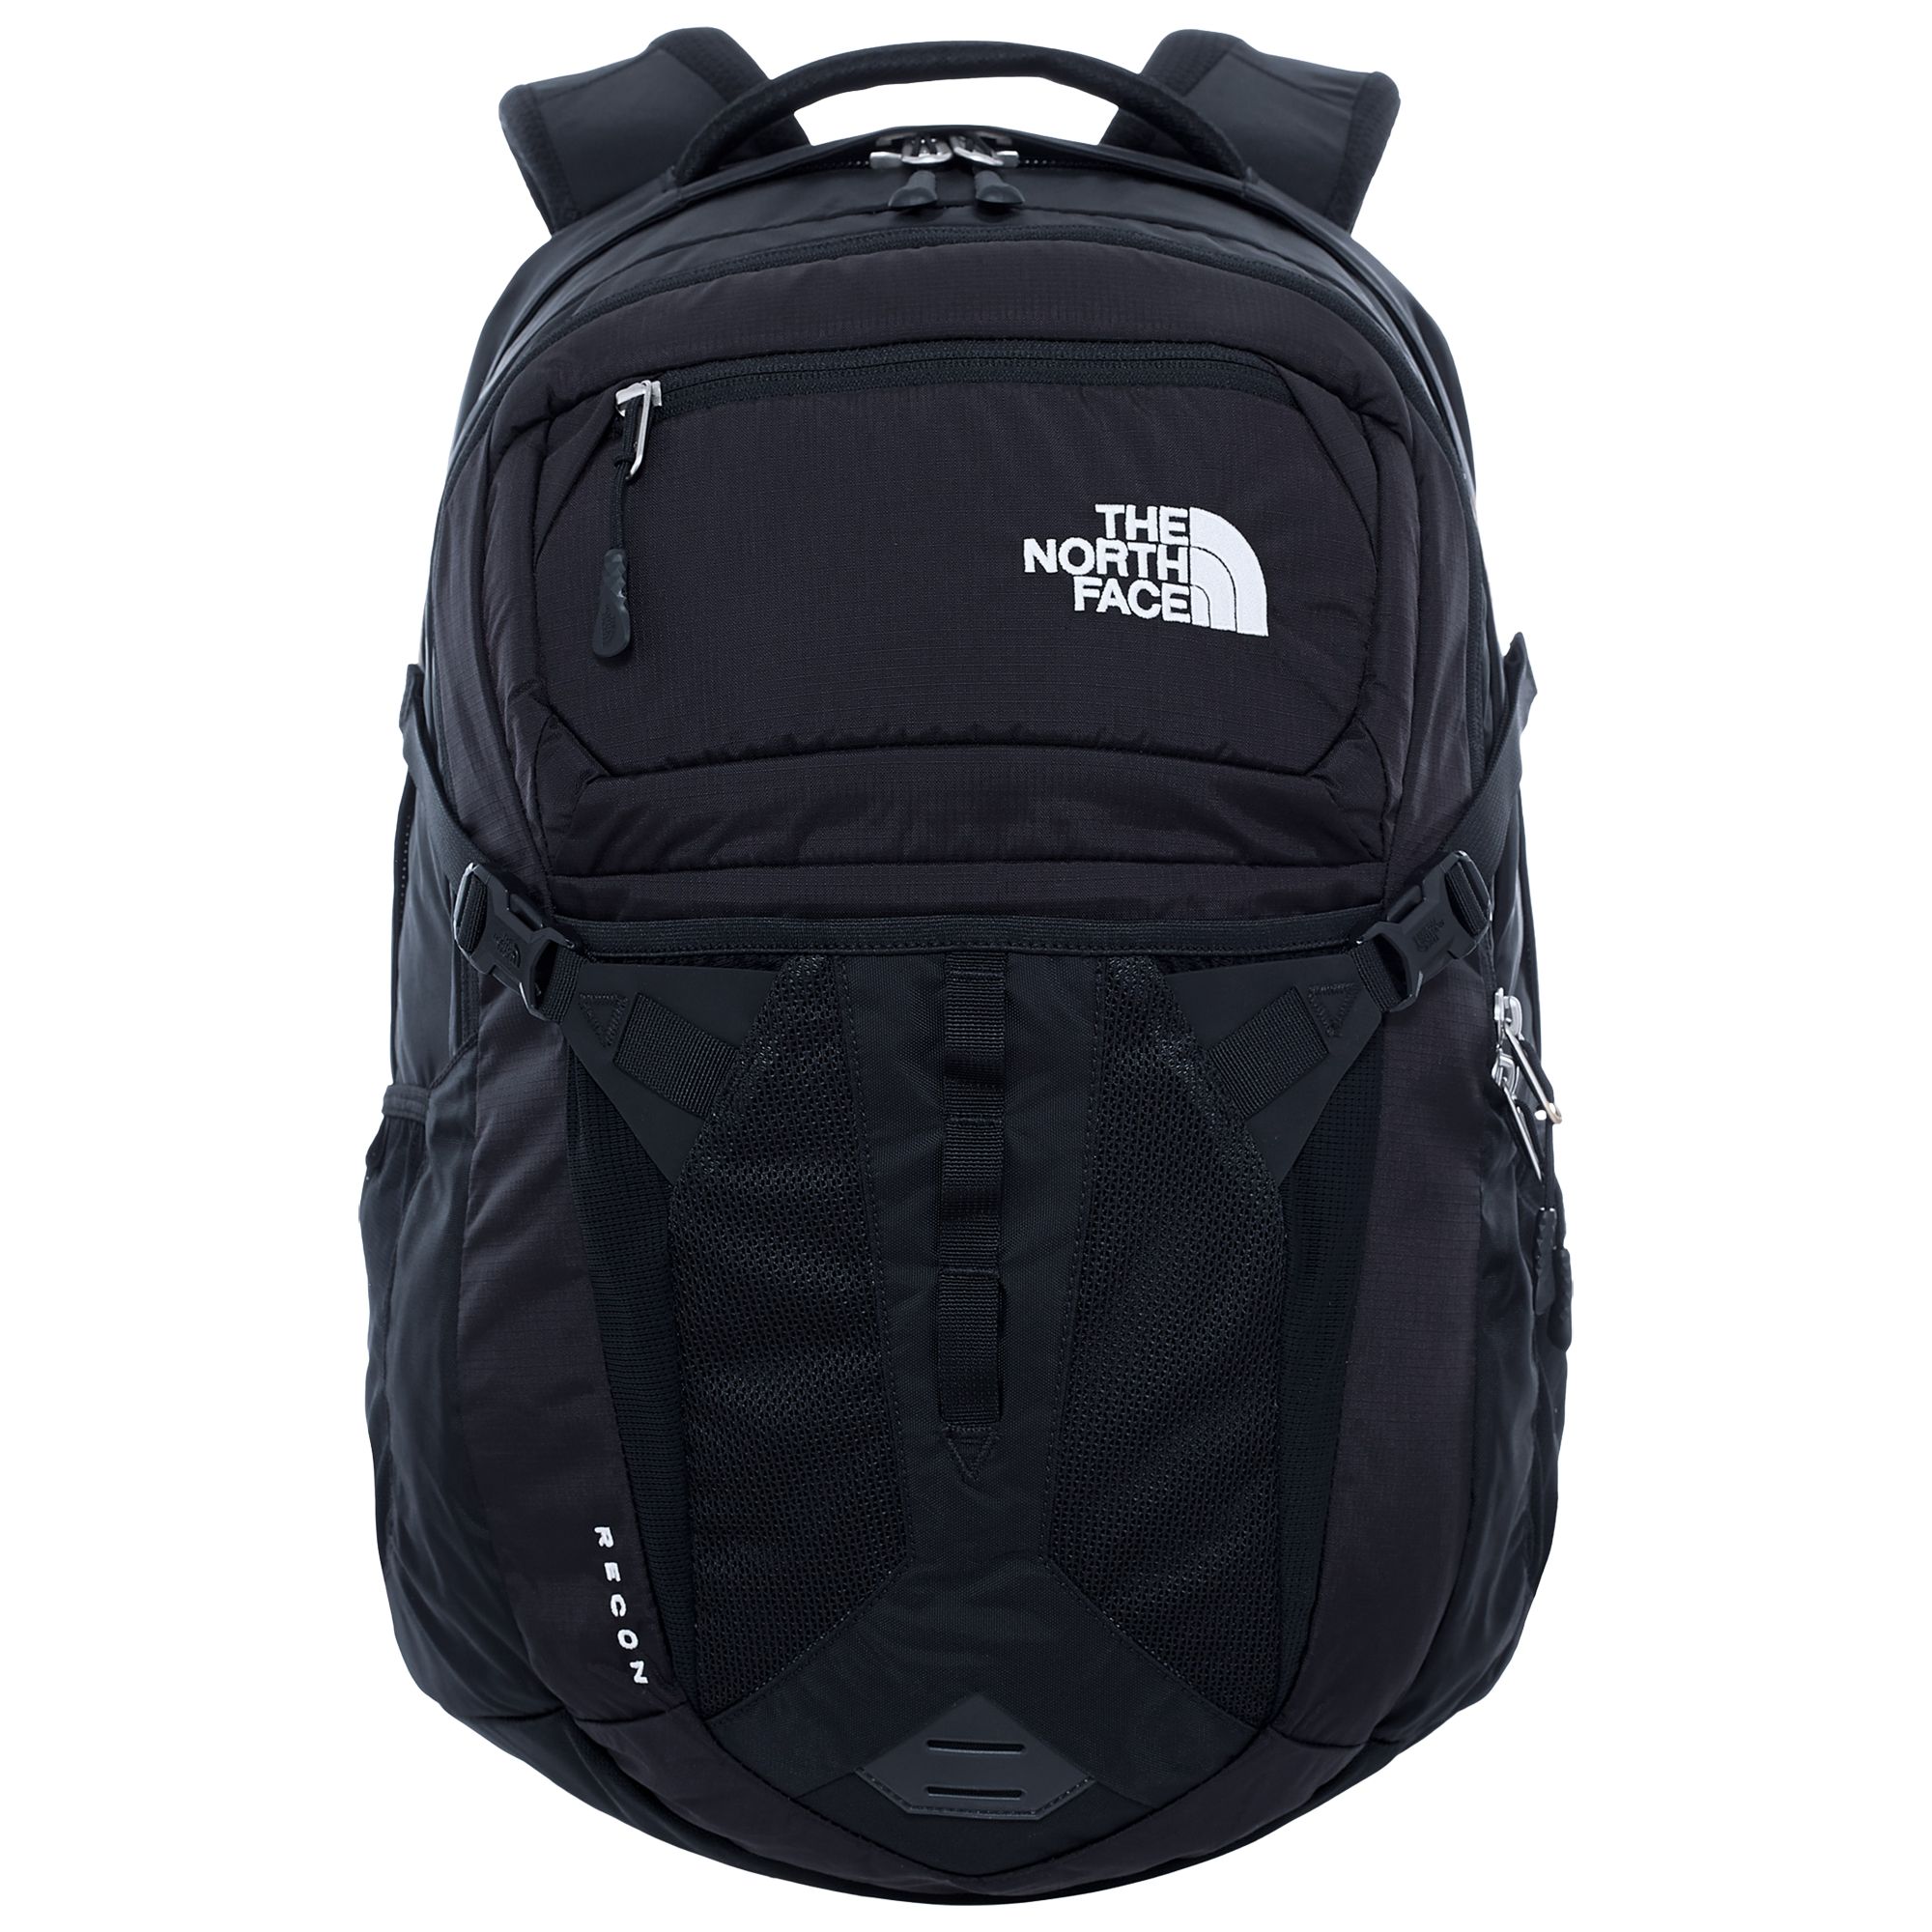 The North Face Recon Backpack, Black